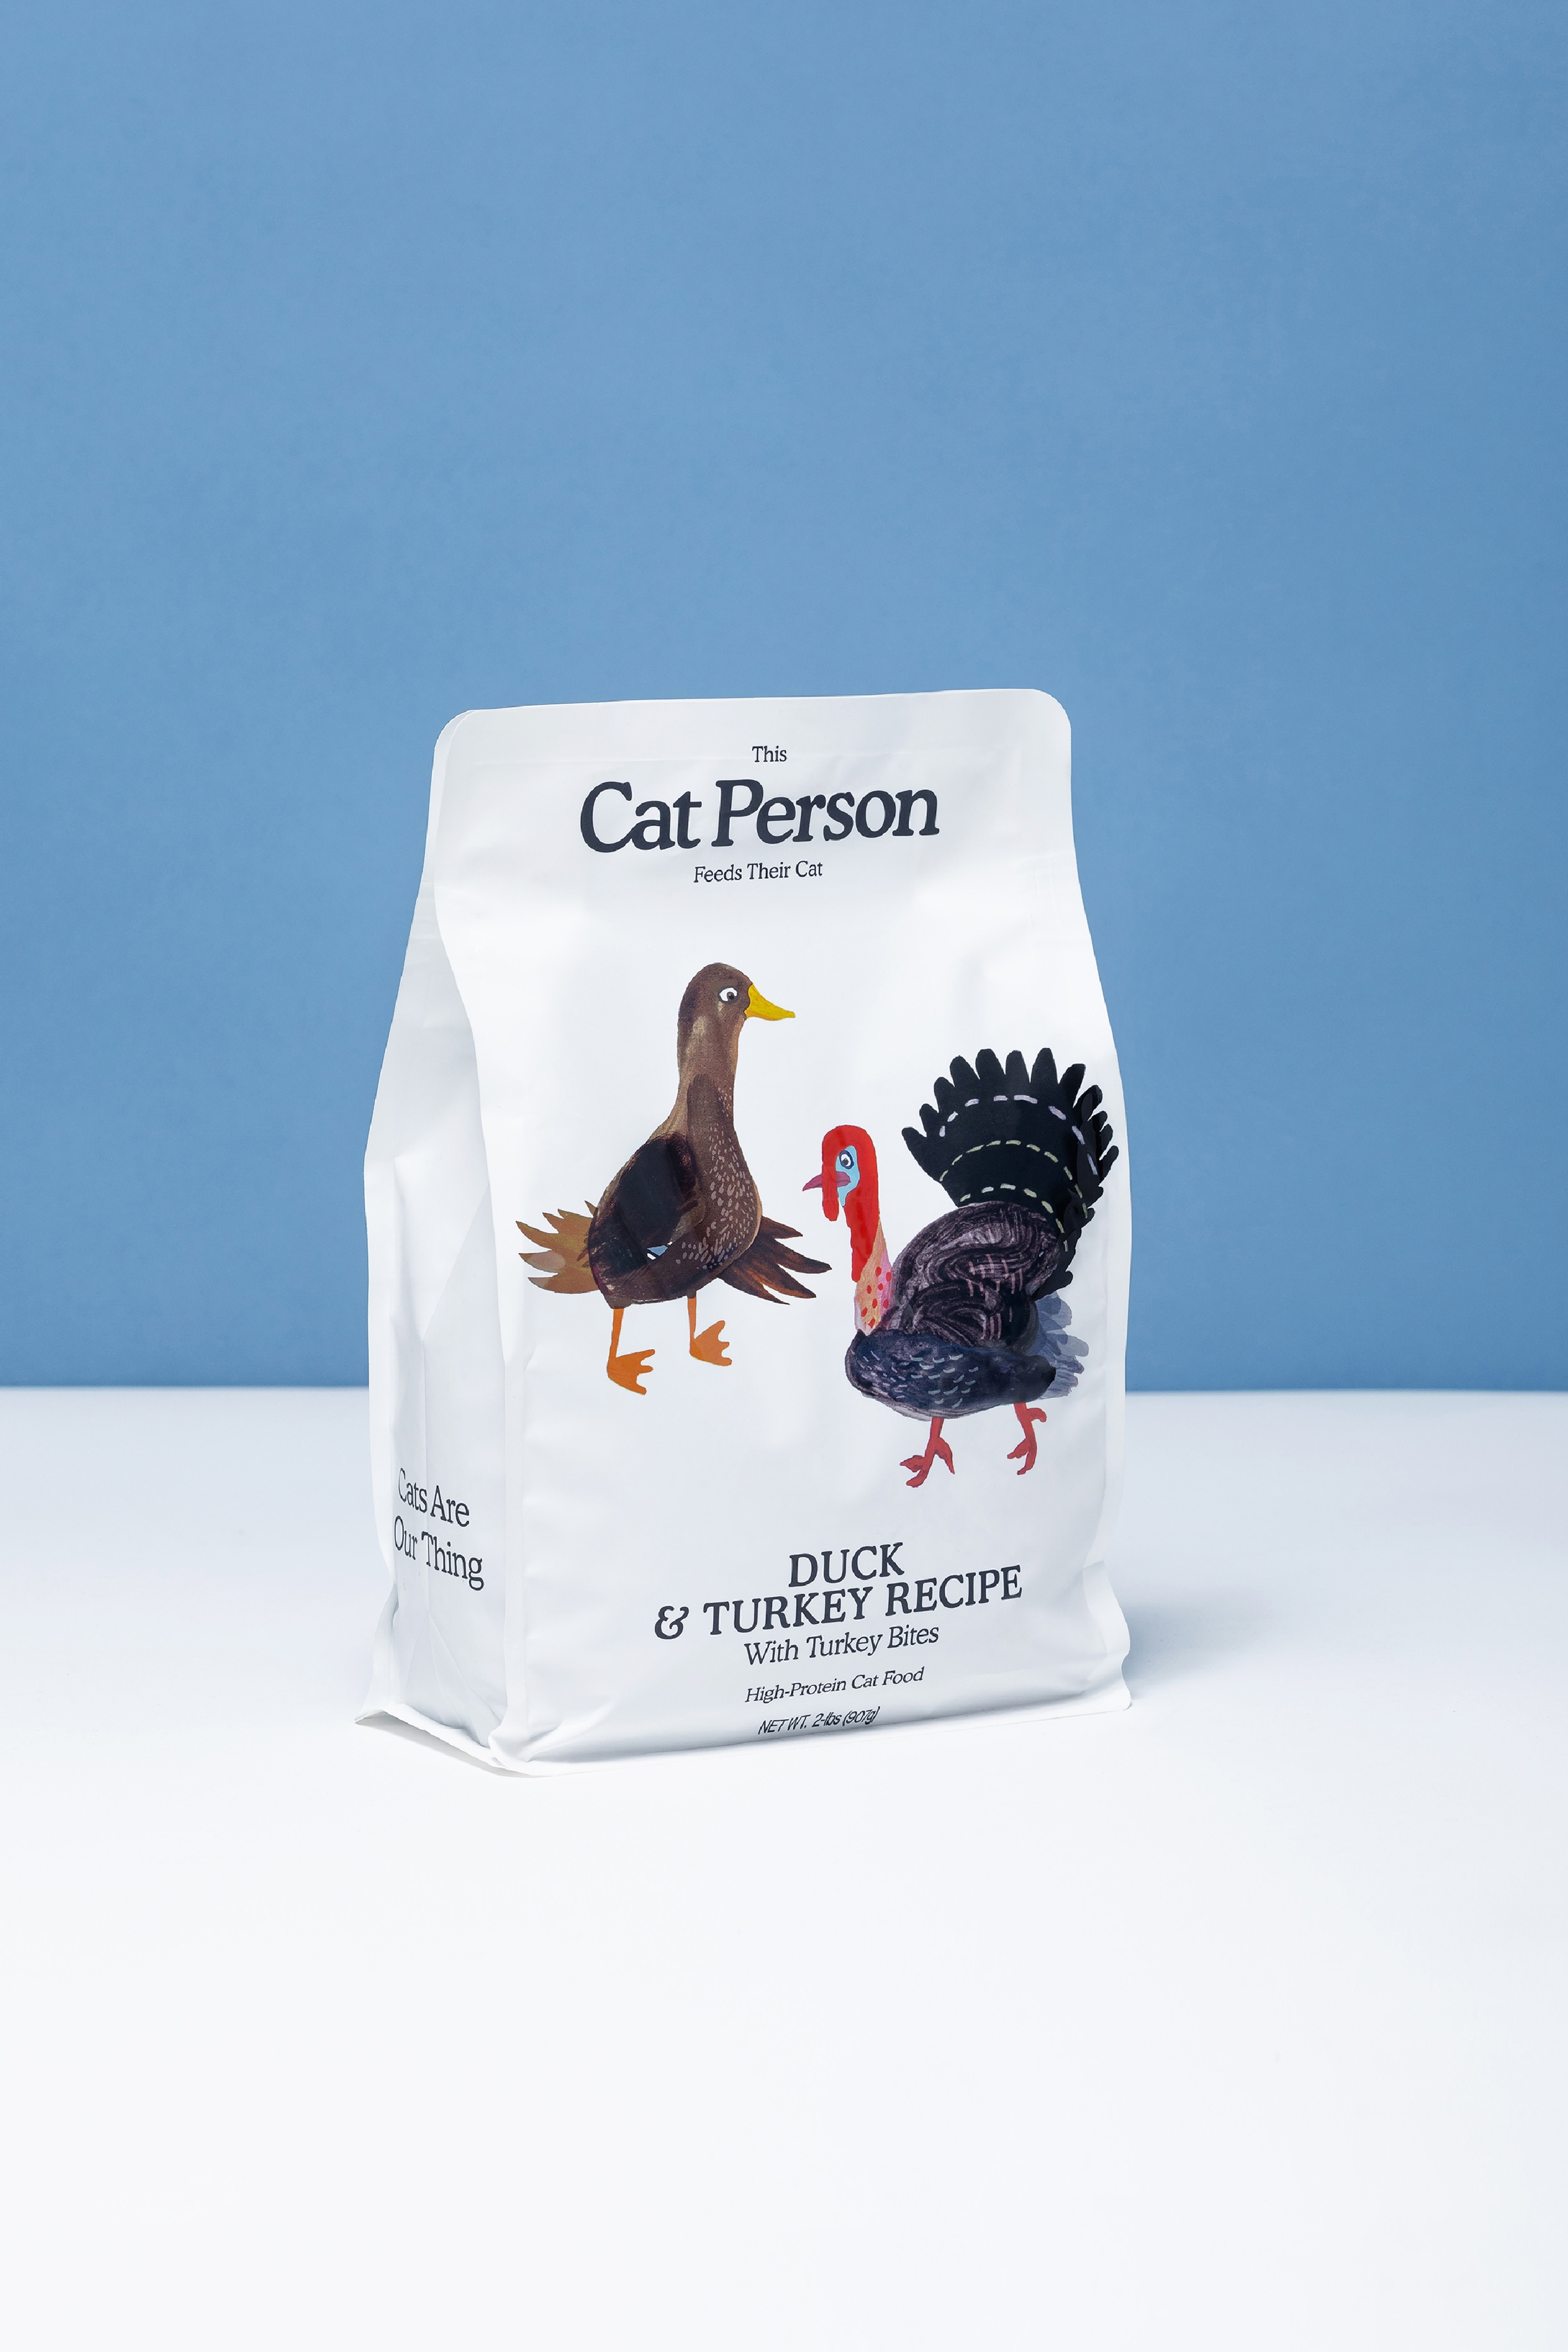 Bag of Cat Person Duck & Turkey Dry Food